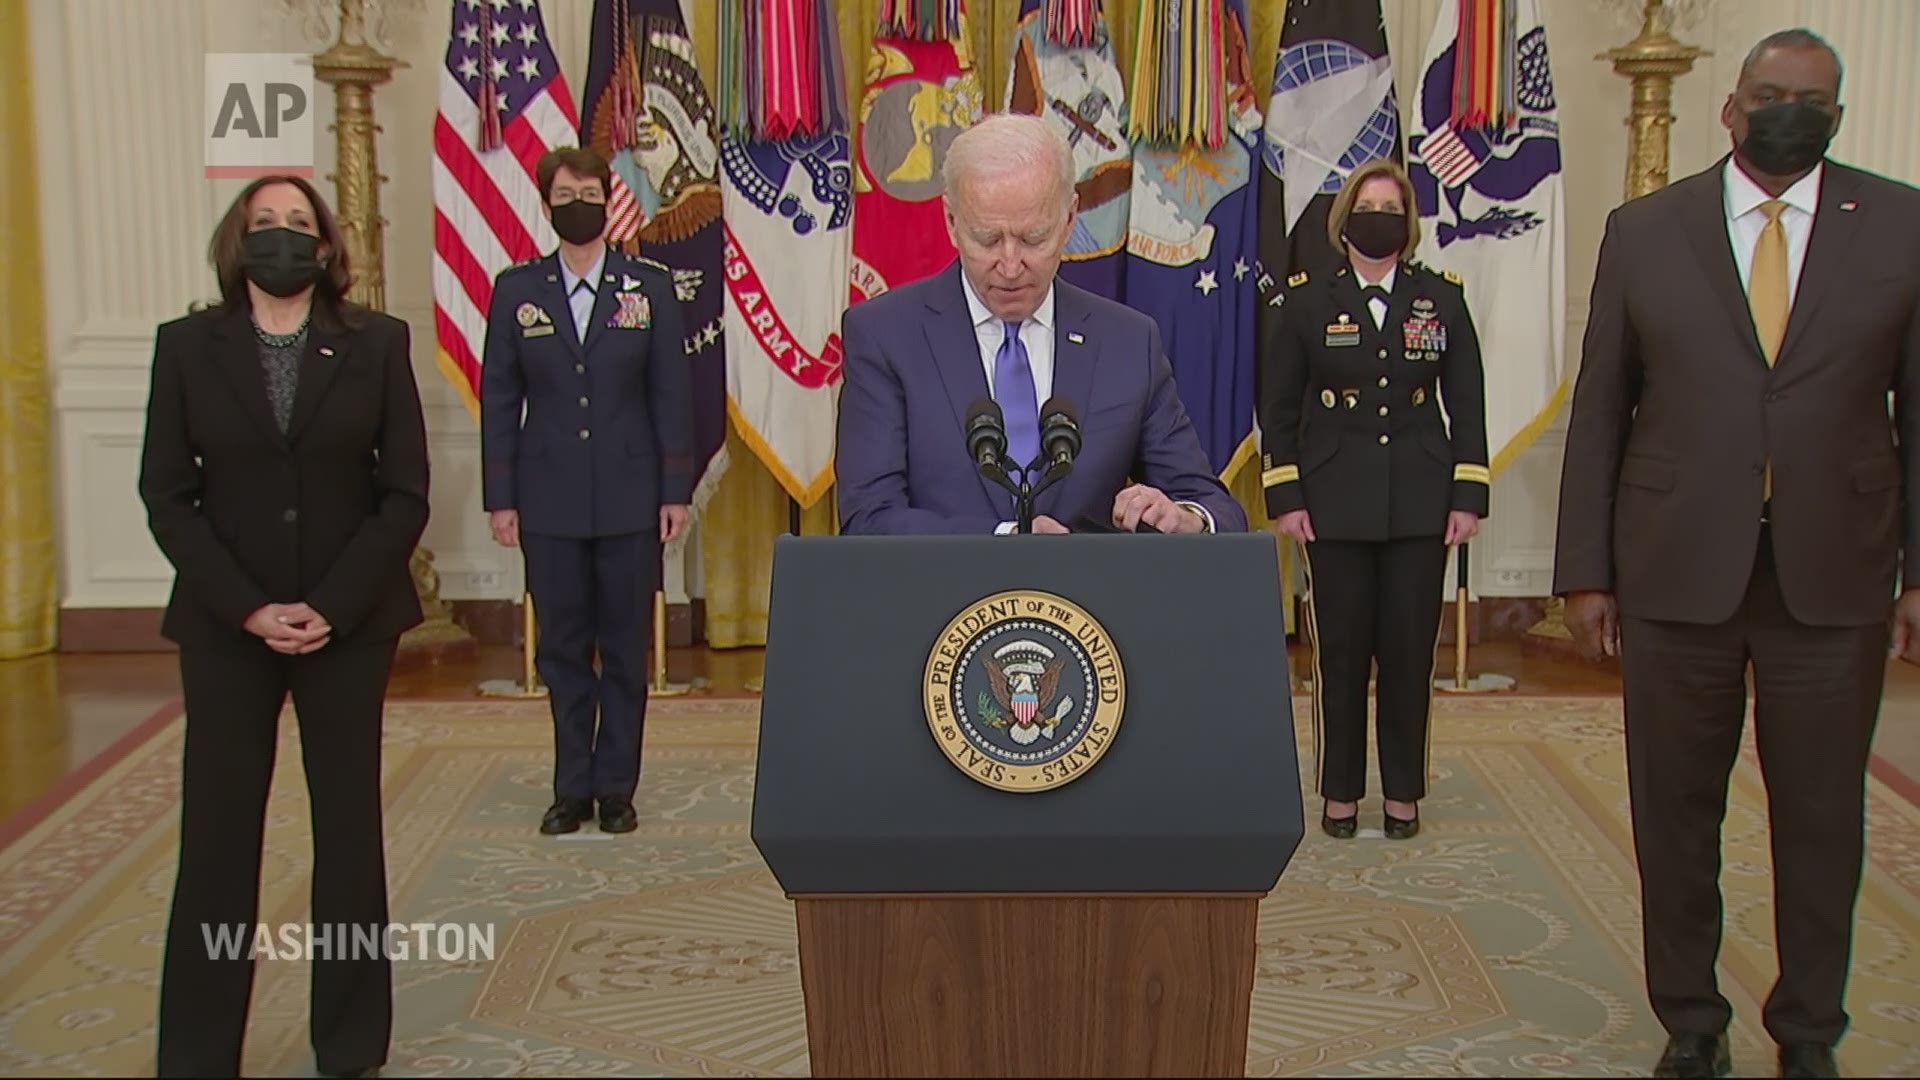 Biden announced he has nominated two female generals for appointment to positions as four-star combatant commanders.